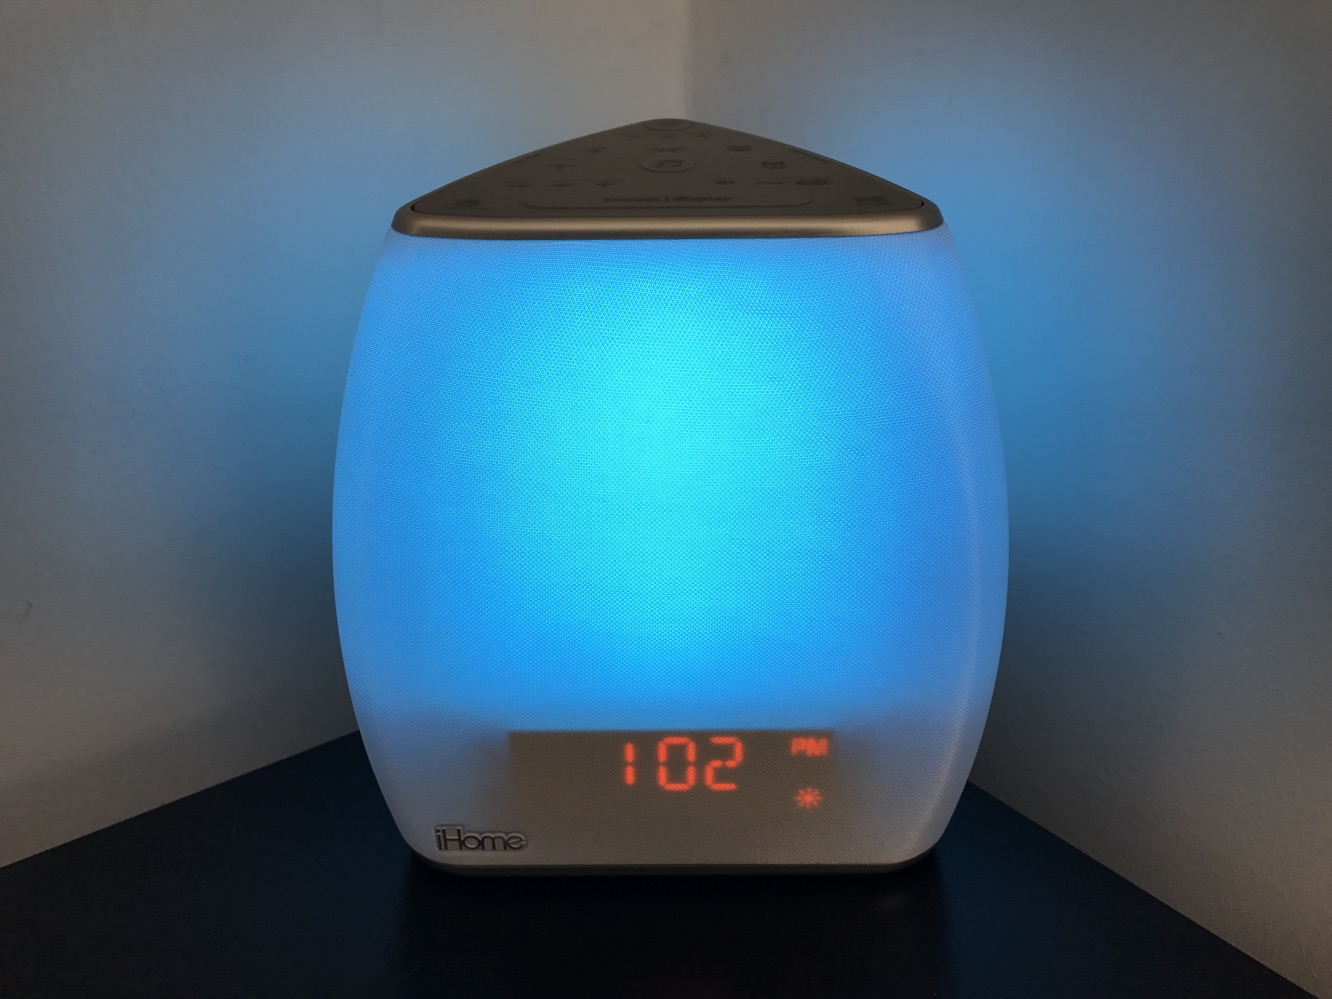 IHome Zenergy Bedside Sleep Therapy Machine Review: Wake Up To A Bright New Day